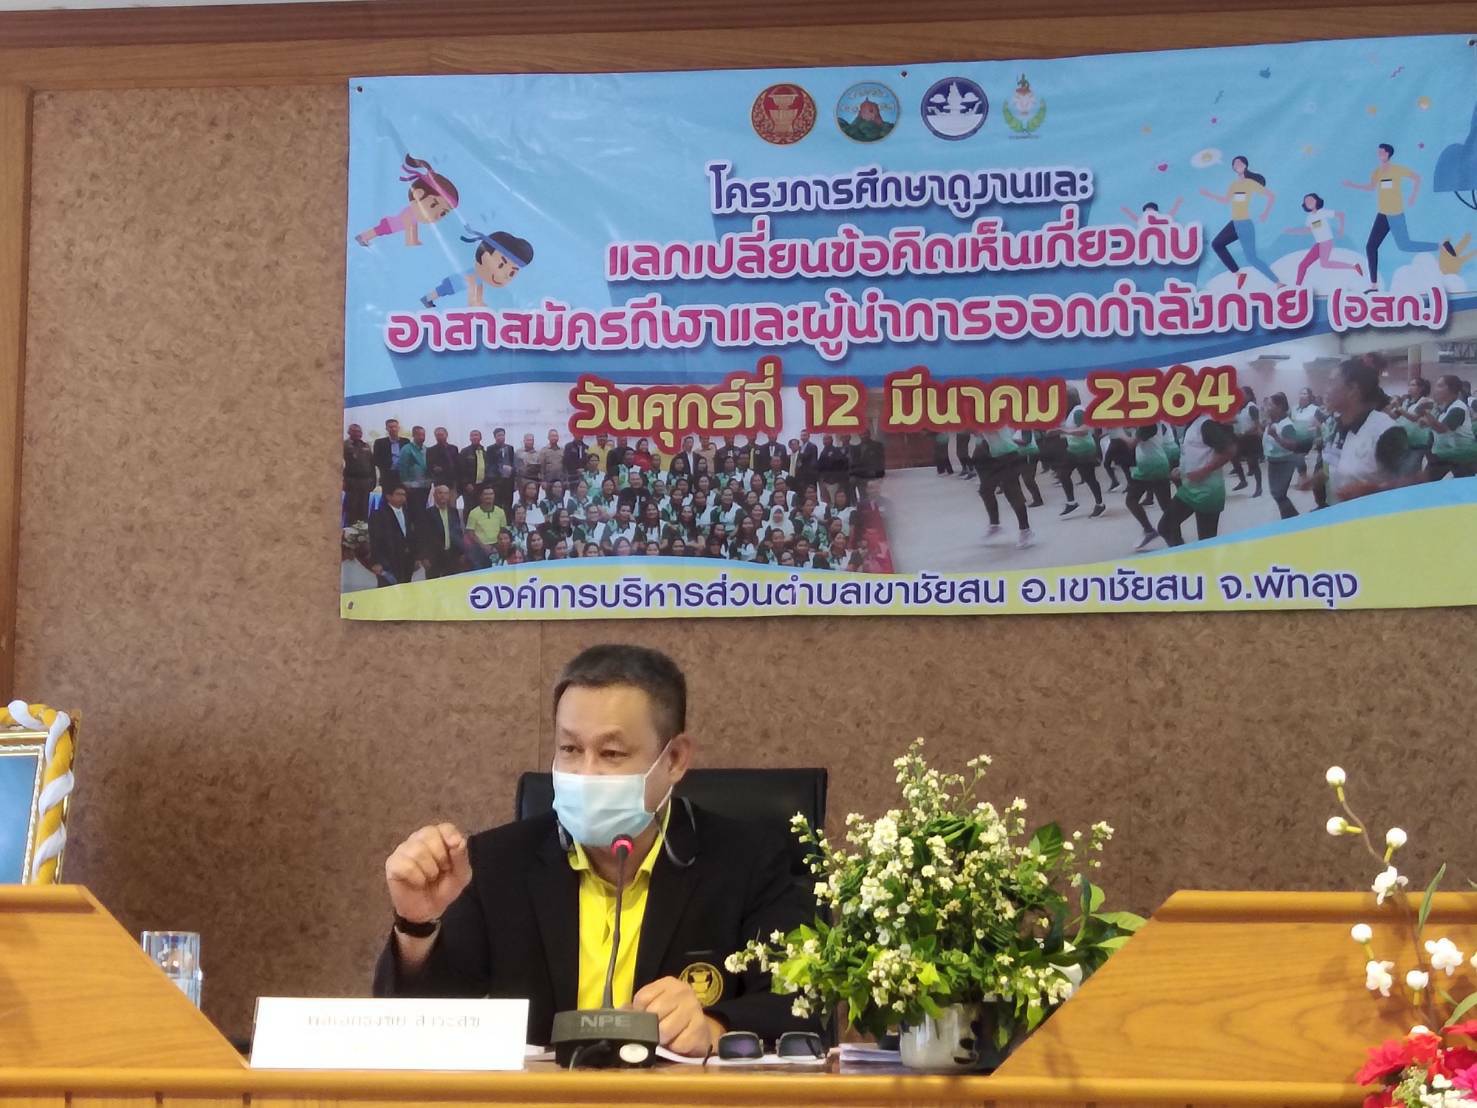 12 March 2021, at Khao Chaison Sub-district Administrative Organization, Phatthalung Province